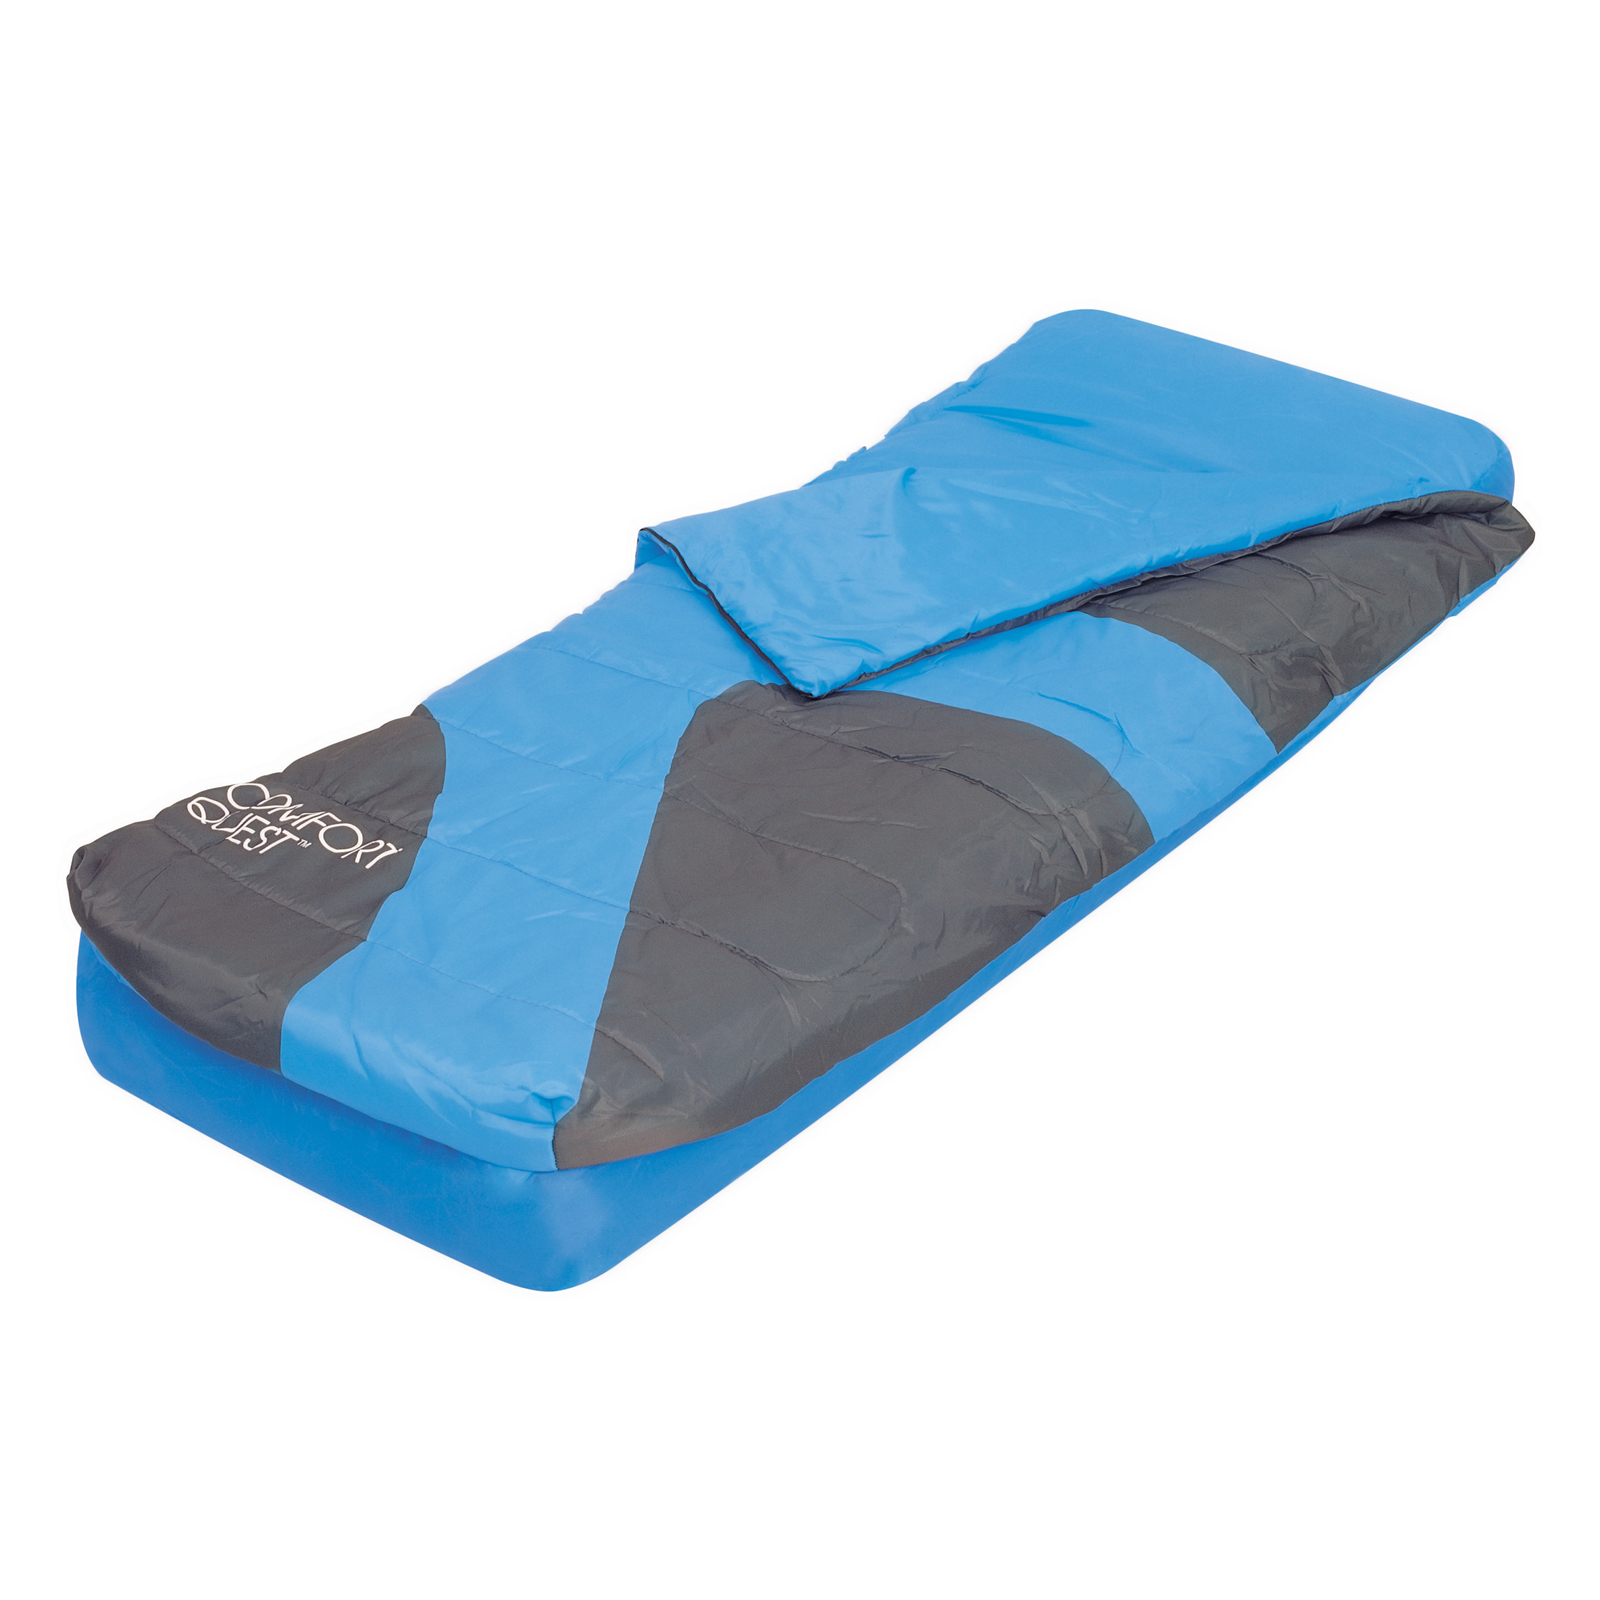 UPC 821808100057 product image for Aslepa Airbed Single - Blue | upcitemdb.com